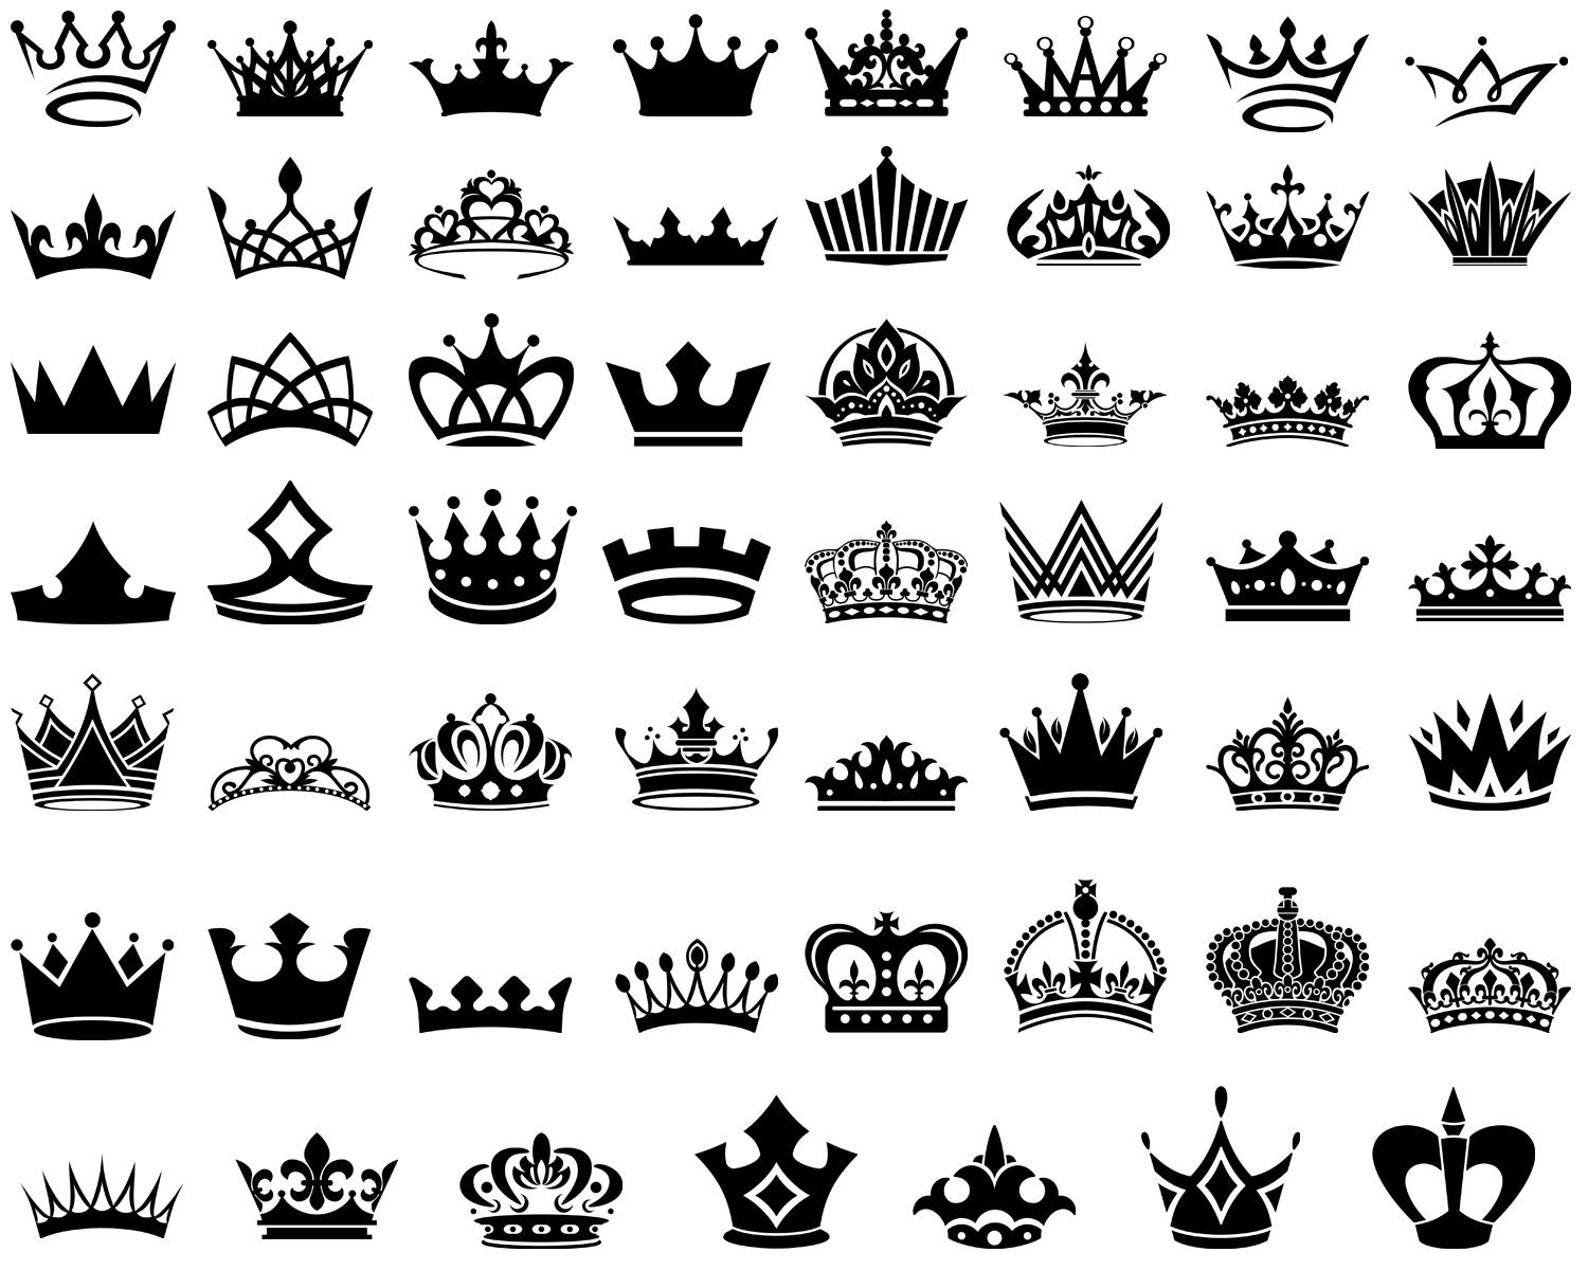 Nice black queen crown collection.